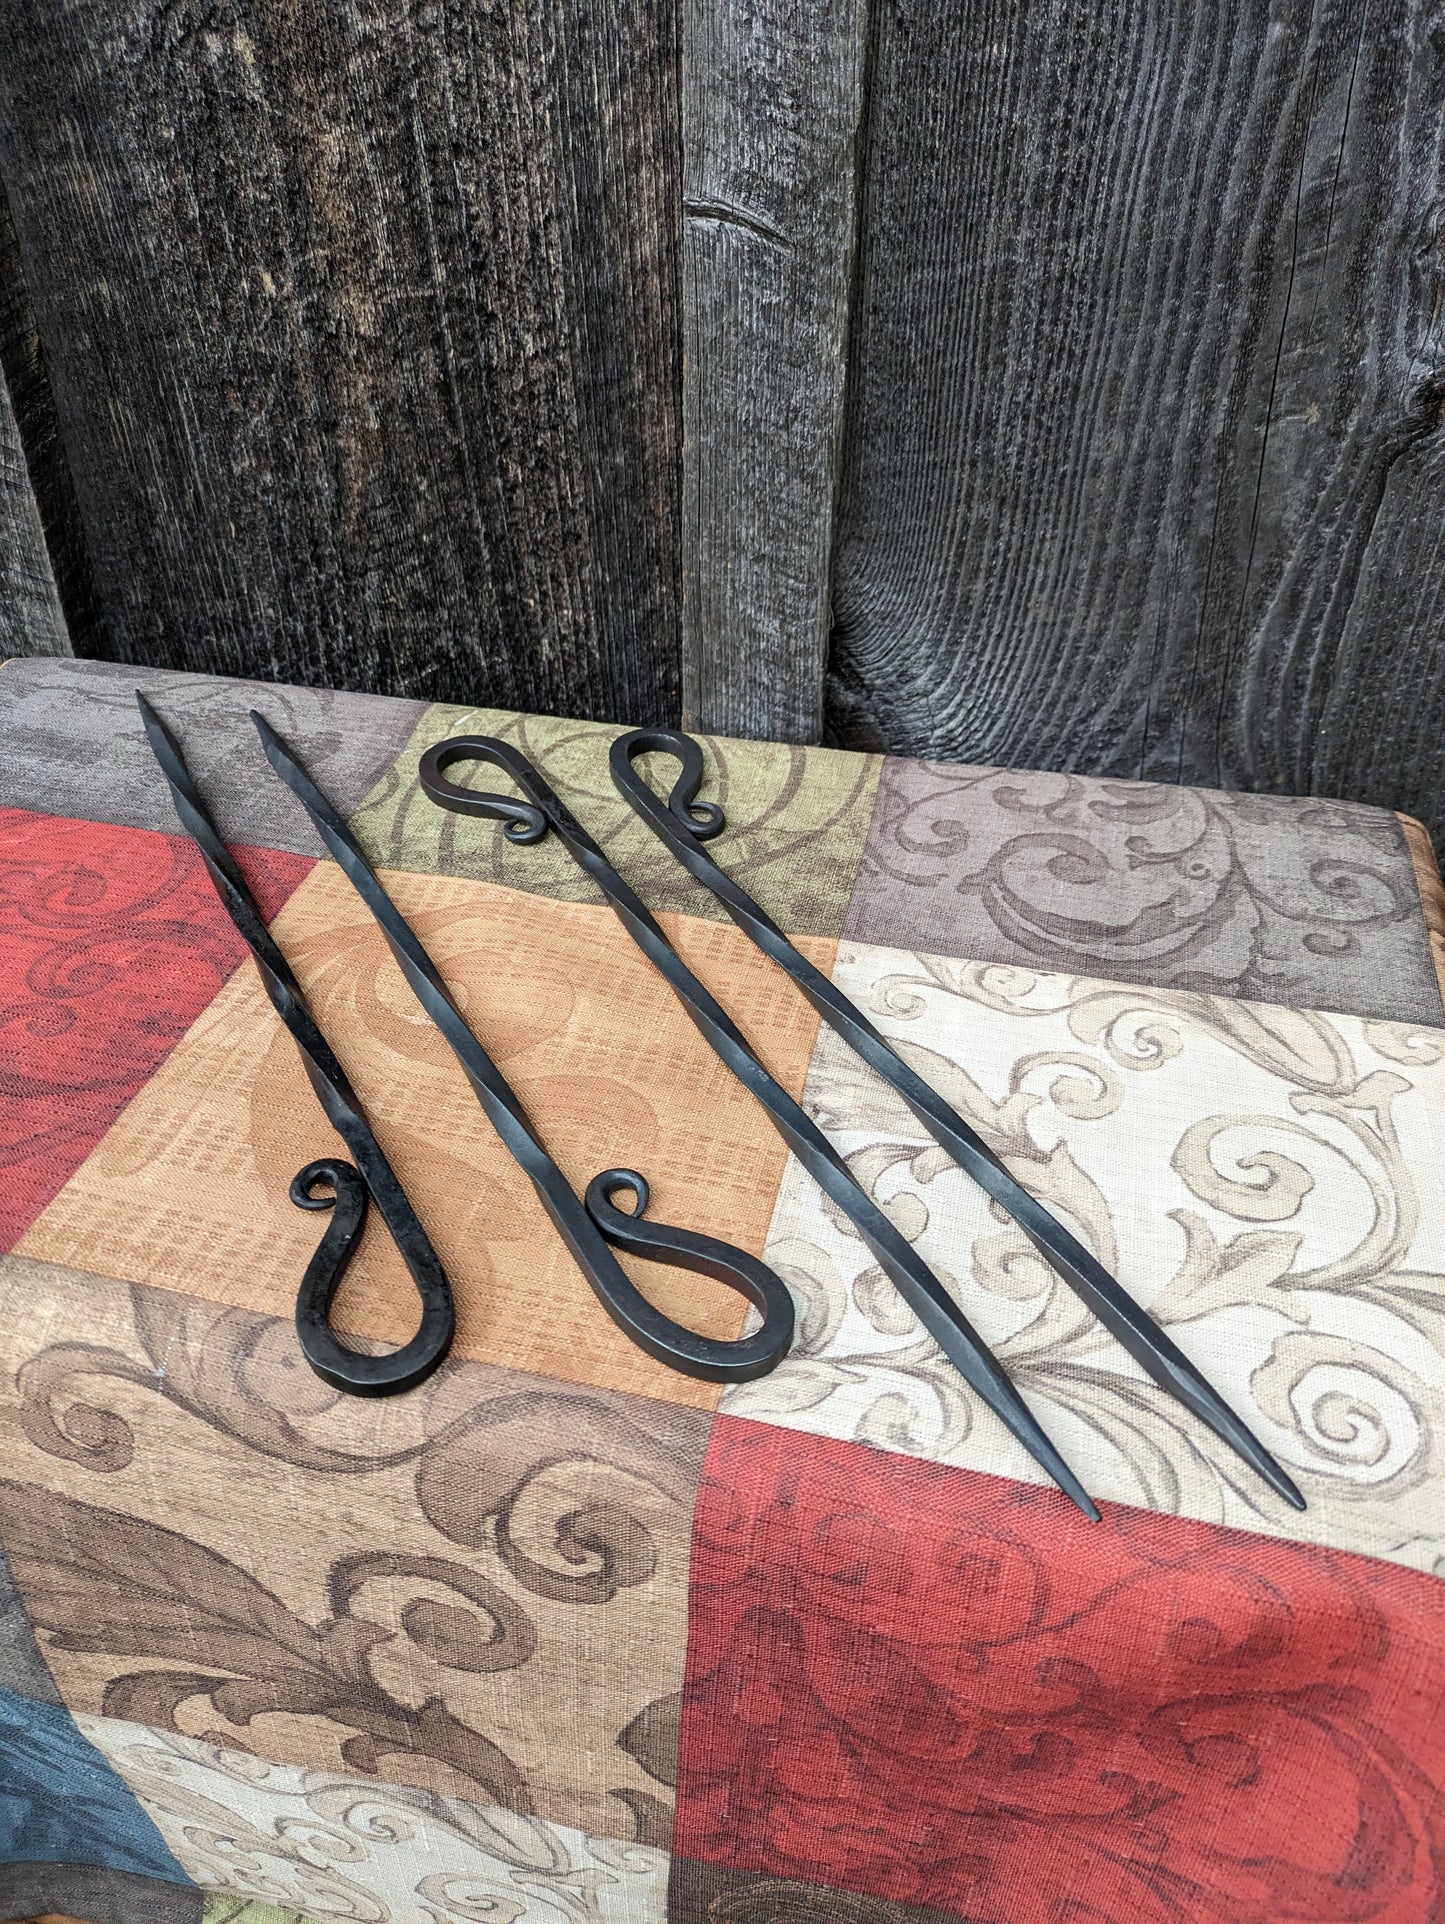 Hand Forged Barbecue or Kabob Skewers